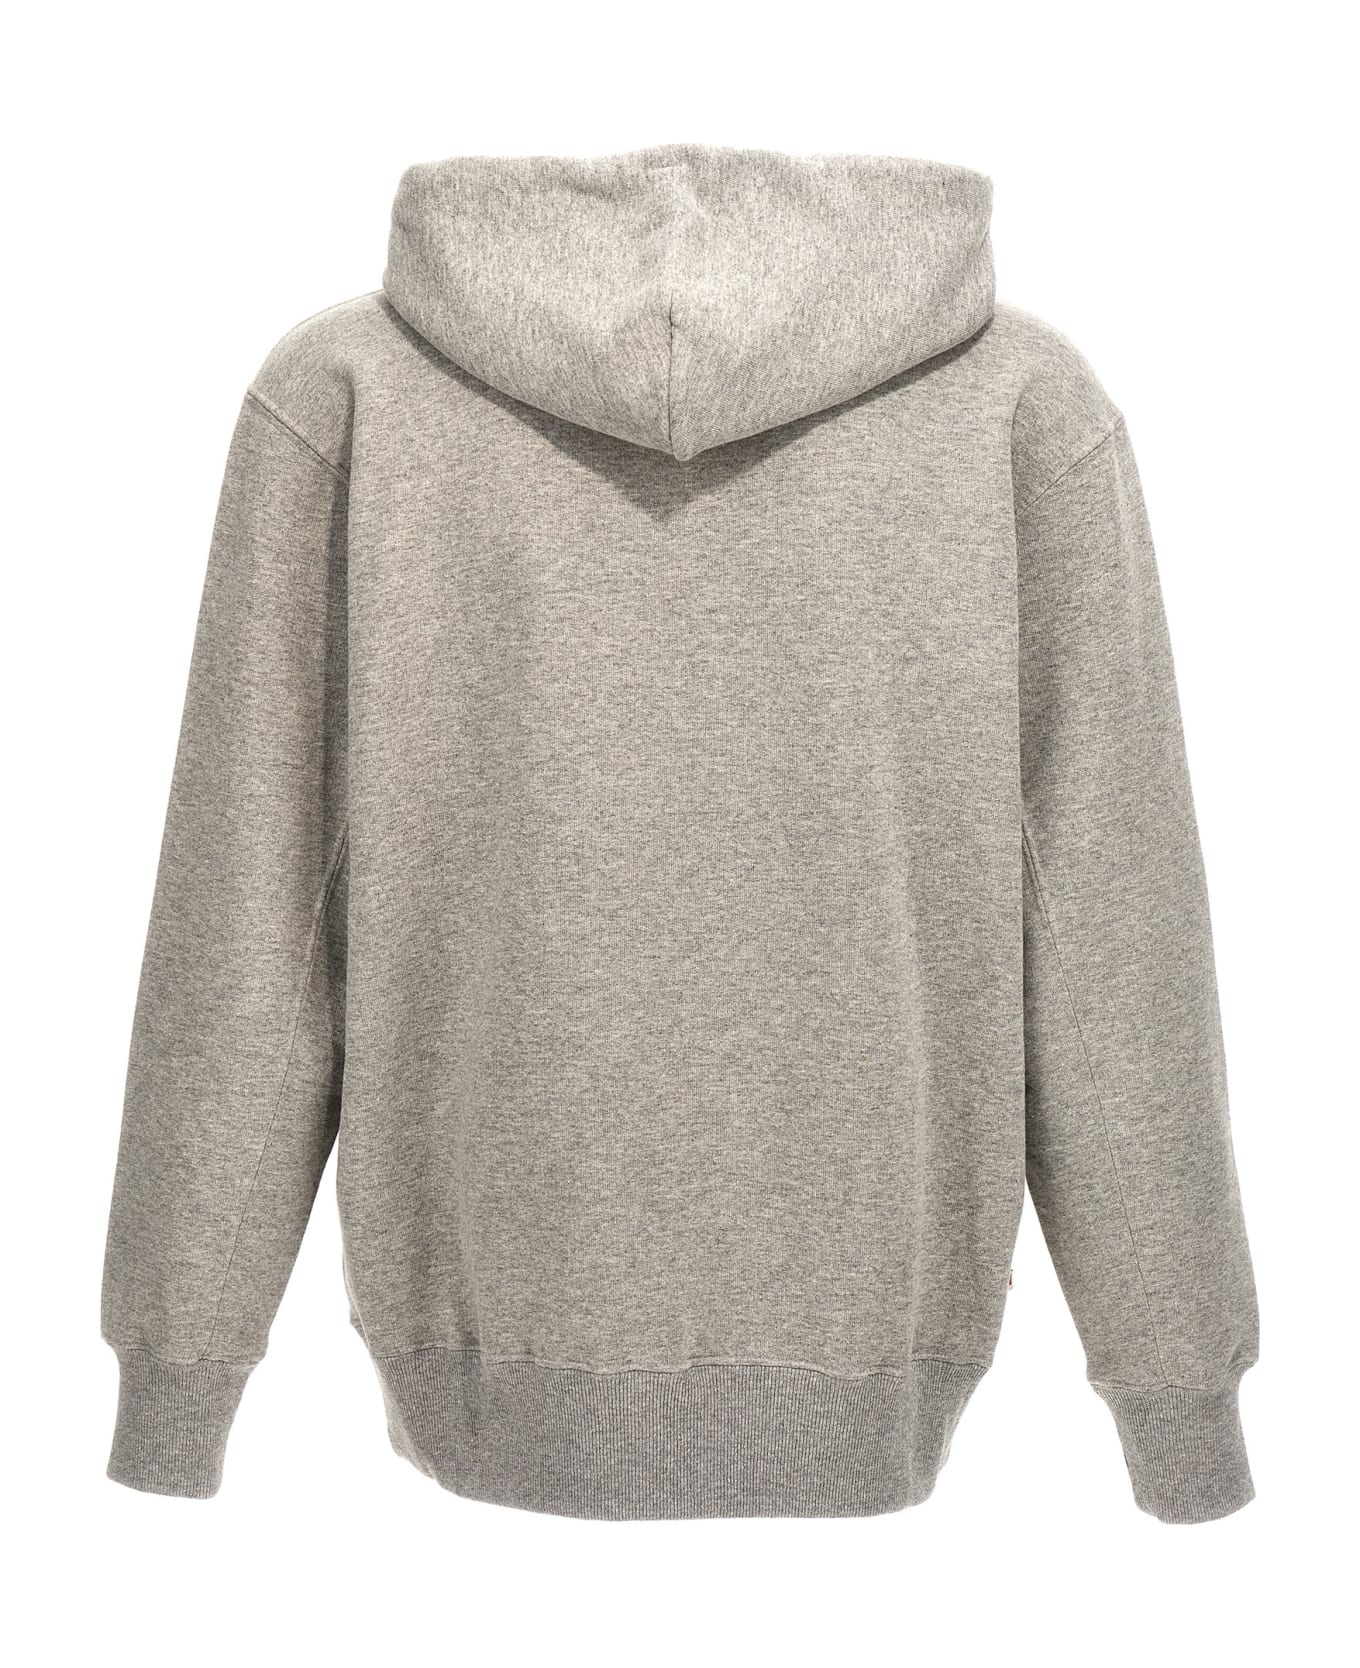 Autry Ease Hoodie - Gray フリース